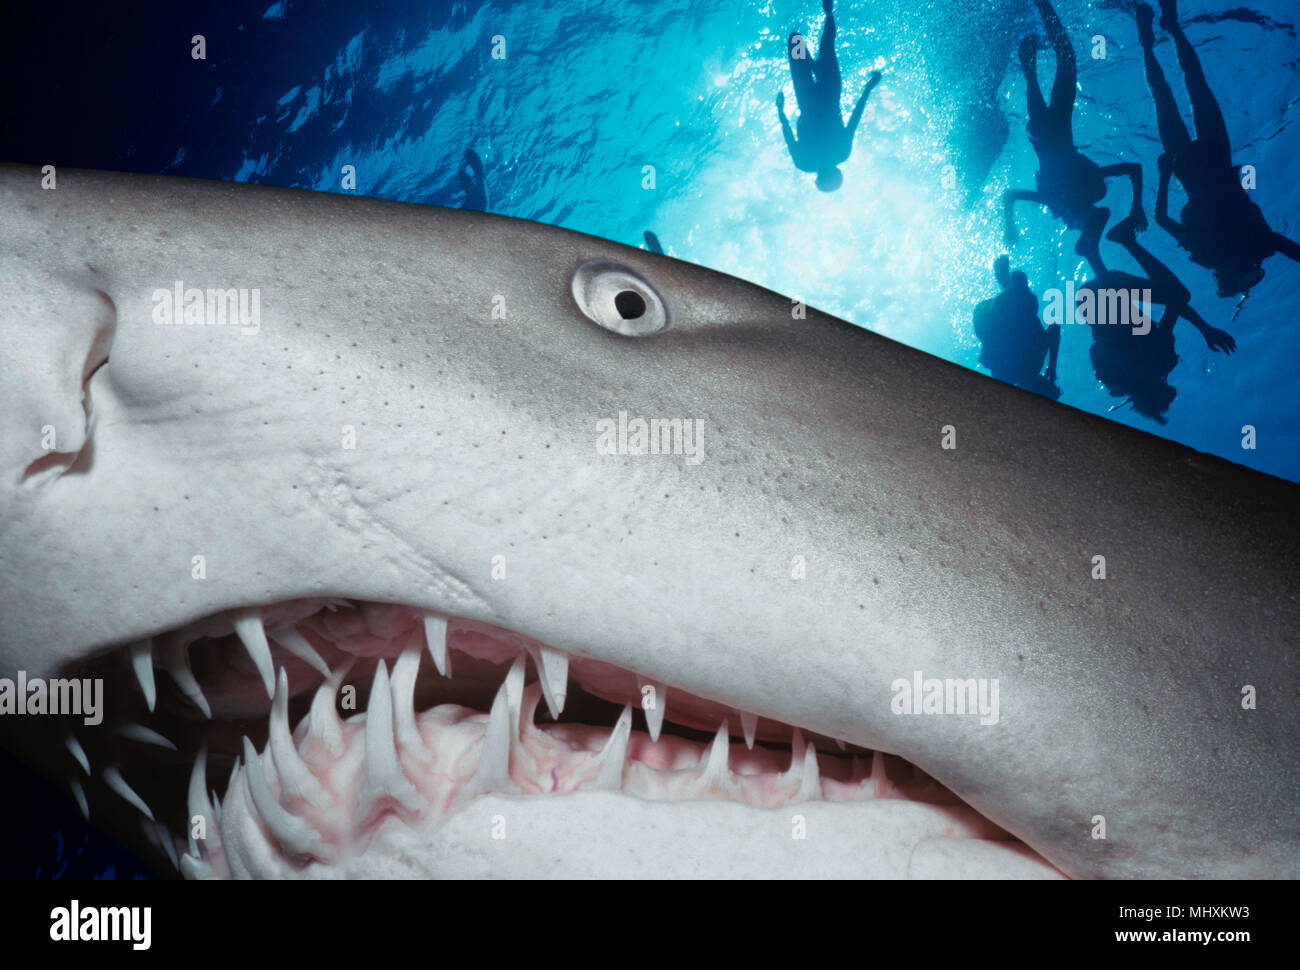 Sand Tiger Shark (Eugomphodus taurus) at night, Eastern Australia - Pacific Ocean.  Image digitally altered to remove distracting or to add more inter Stock Photo